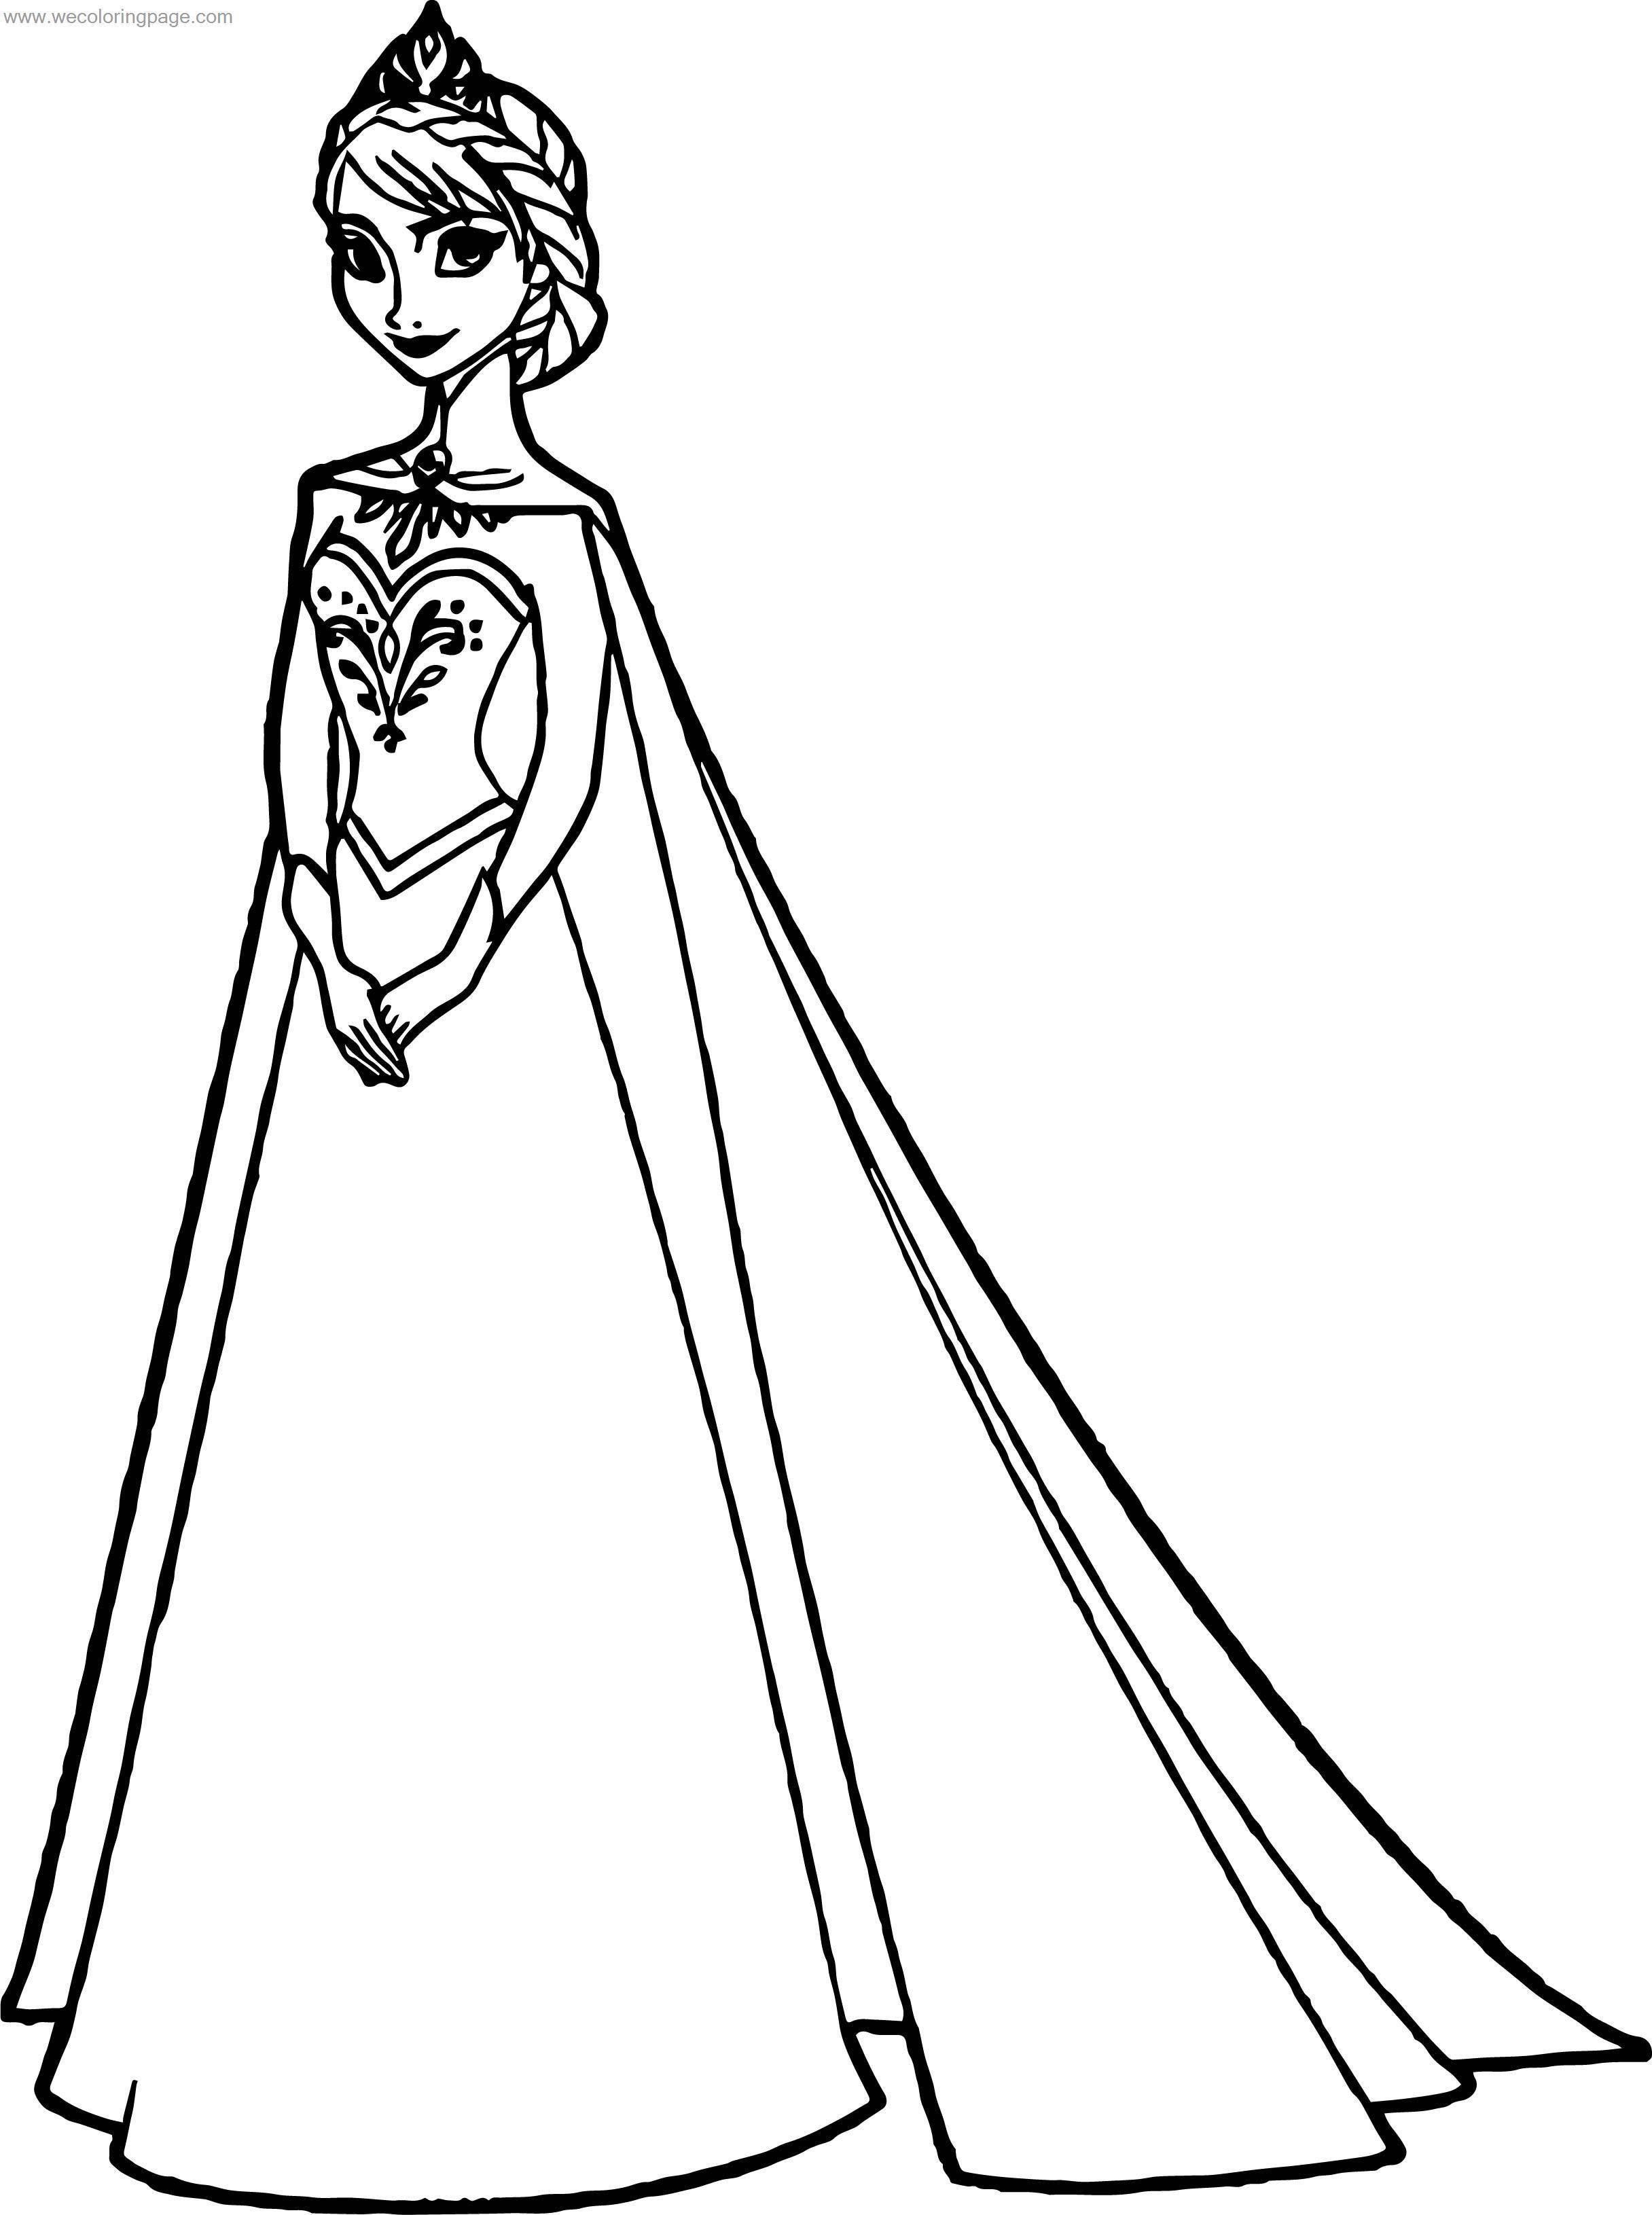 queen-elsa-drawing-free-download-on-clipartmag